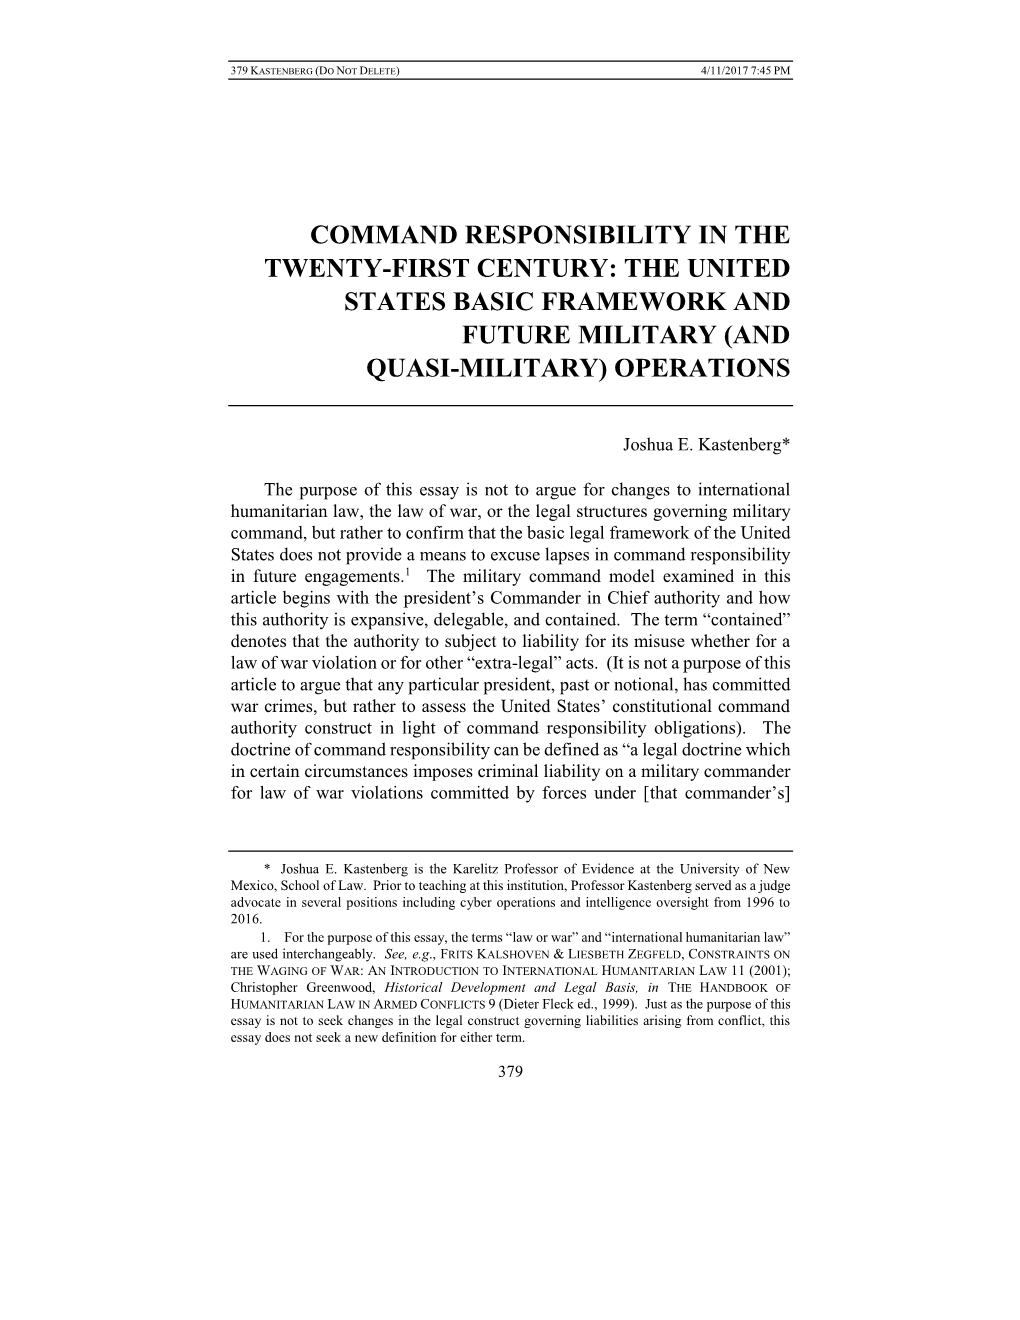 Command Responsibility in the Twenty-First Century: the United States Basic Framework and Future Military (And Quasi-Military) Operations